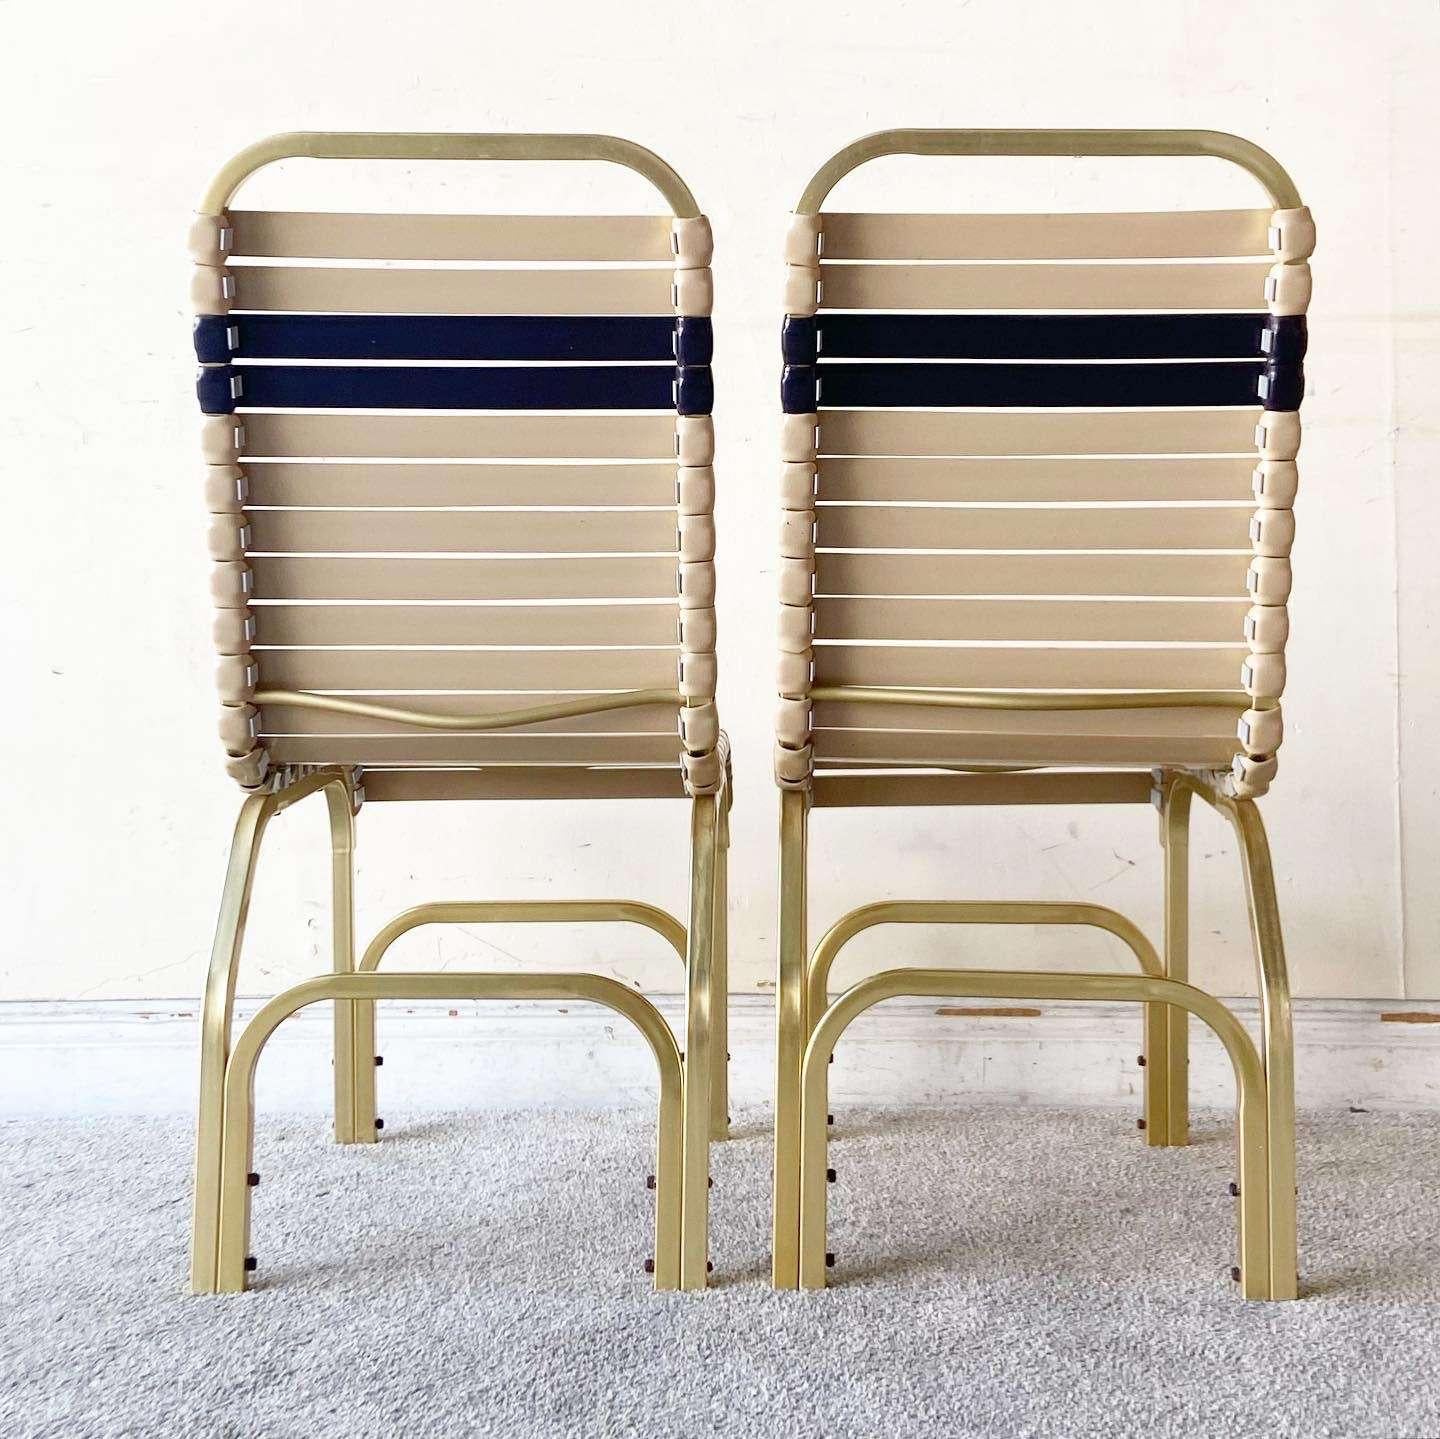 Aluminum Miami Gold Beige & Blue Metal Poolside Chairs and Table - 3 Pieces For Sale